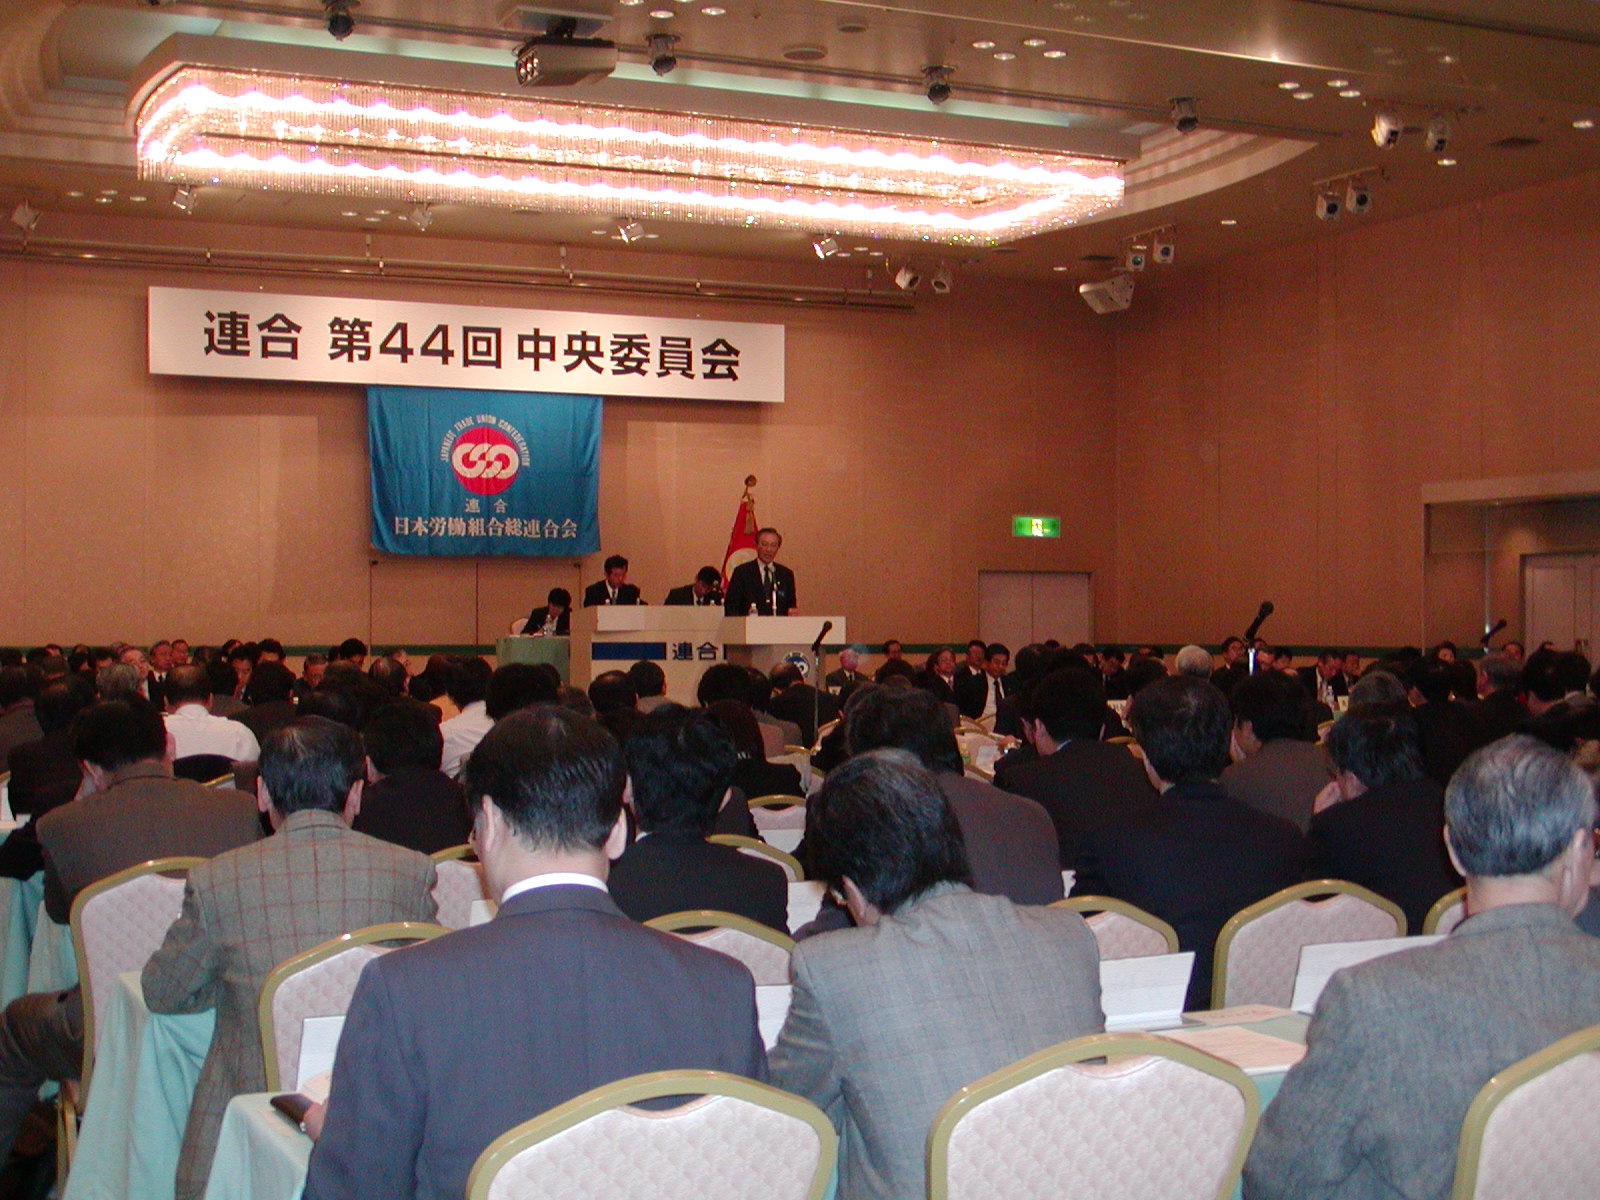 Photo: The 2005 Spring Struggle Policy is endorsed at the meeting. (November 25, Hotel Langwood)